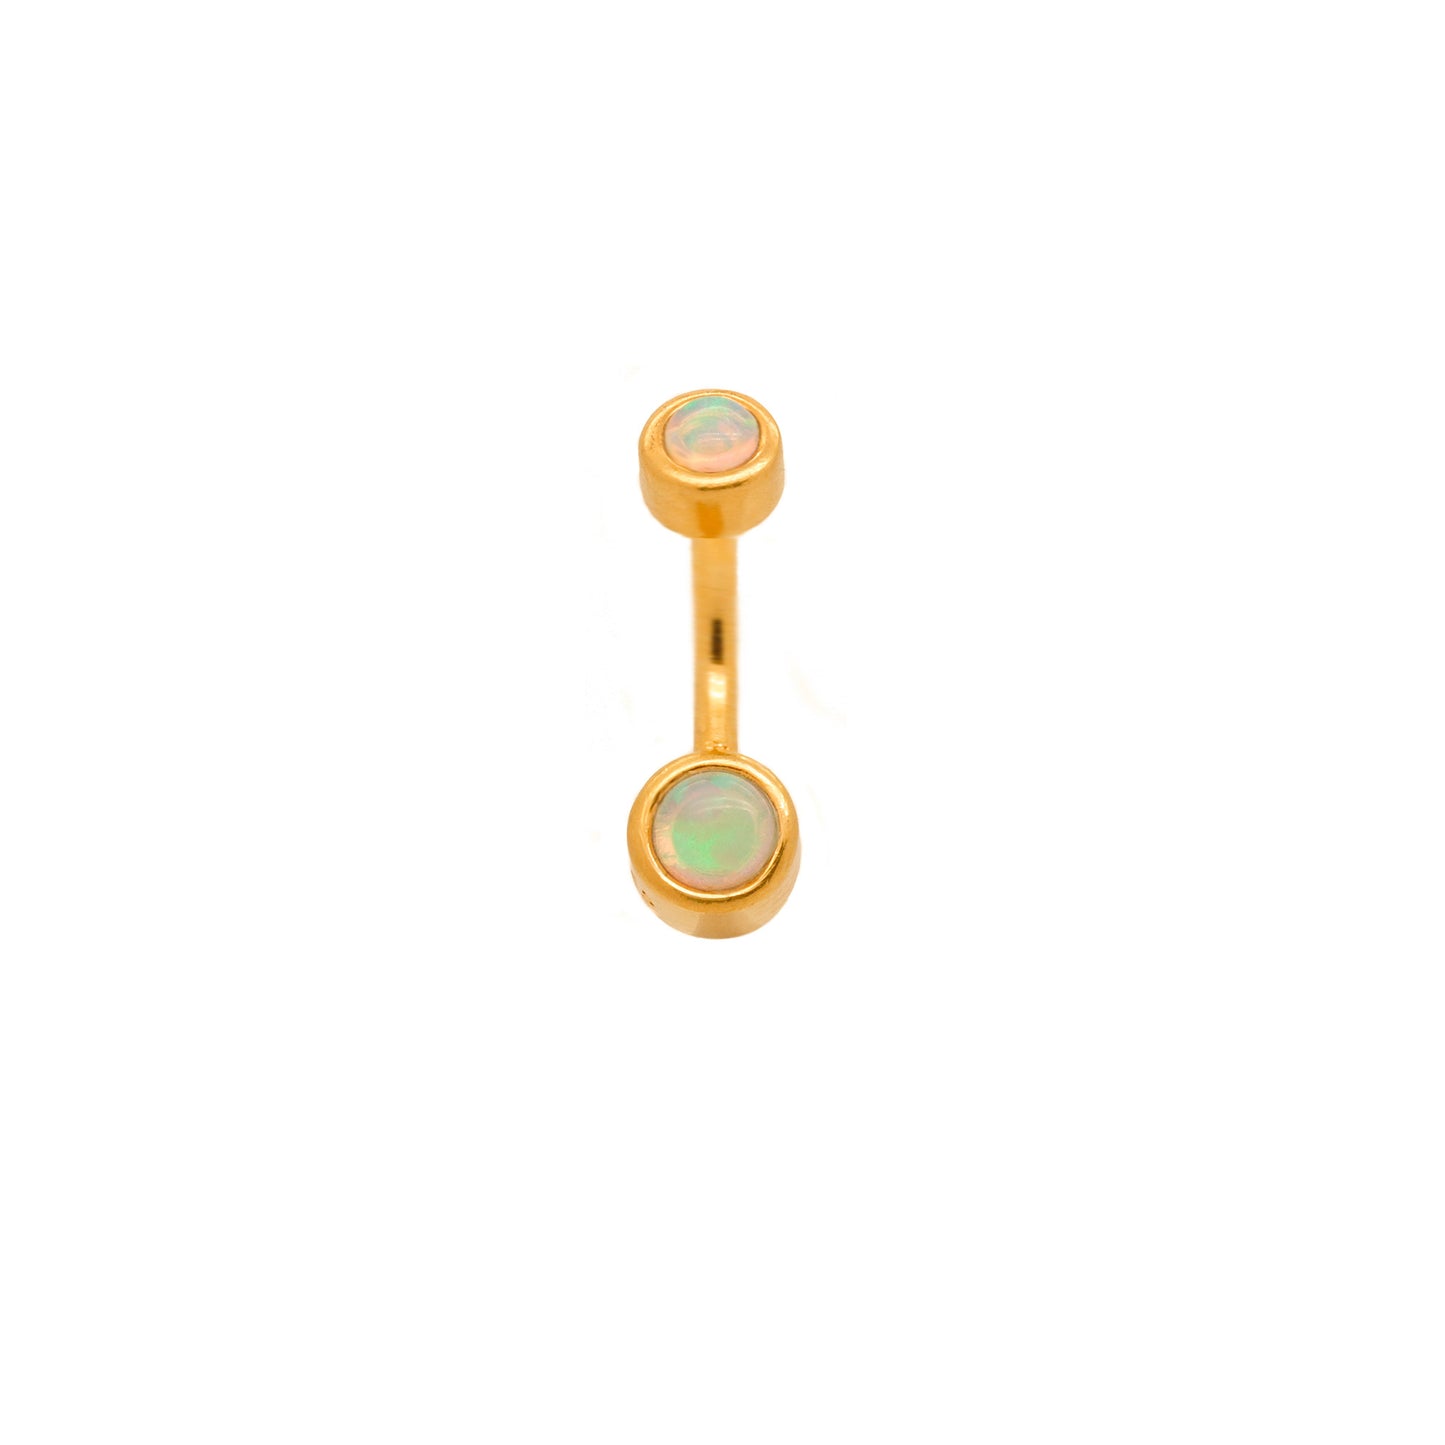 Vermeil | 925 Silver 24k Gold Coated Tiny Blue Kyocera Galaxy Opal Belly Ring | 6mm 1/4" 8mm 5/16" 10mm 3/8" - Sturdy South